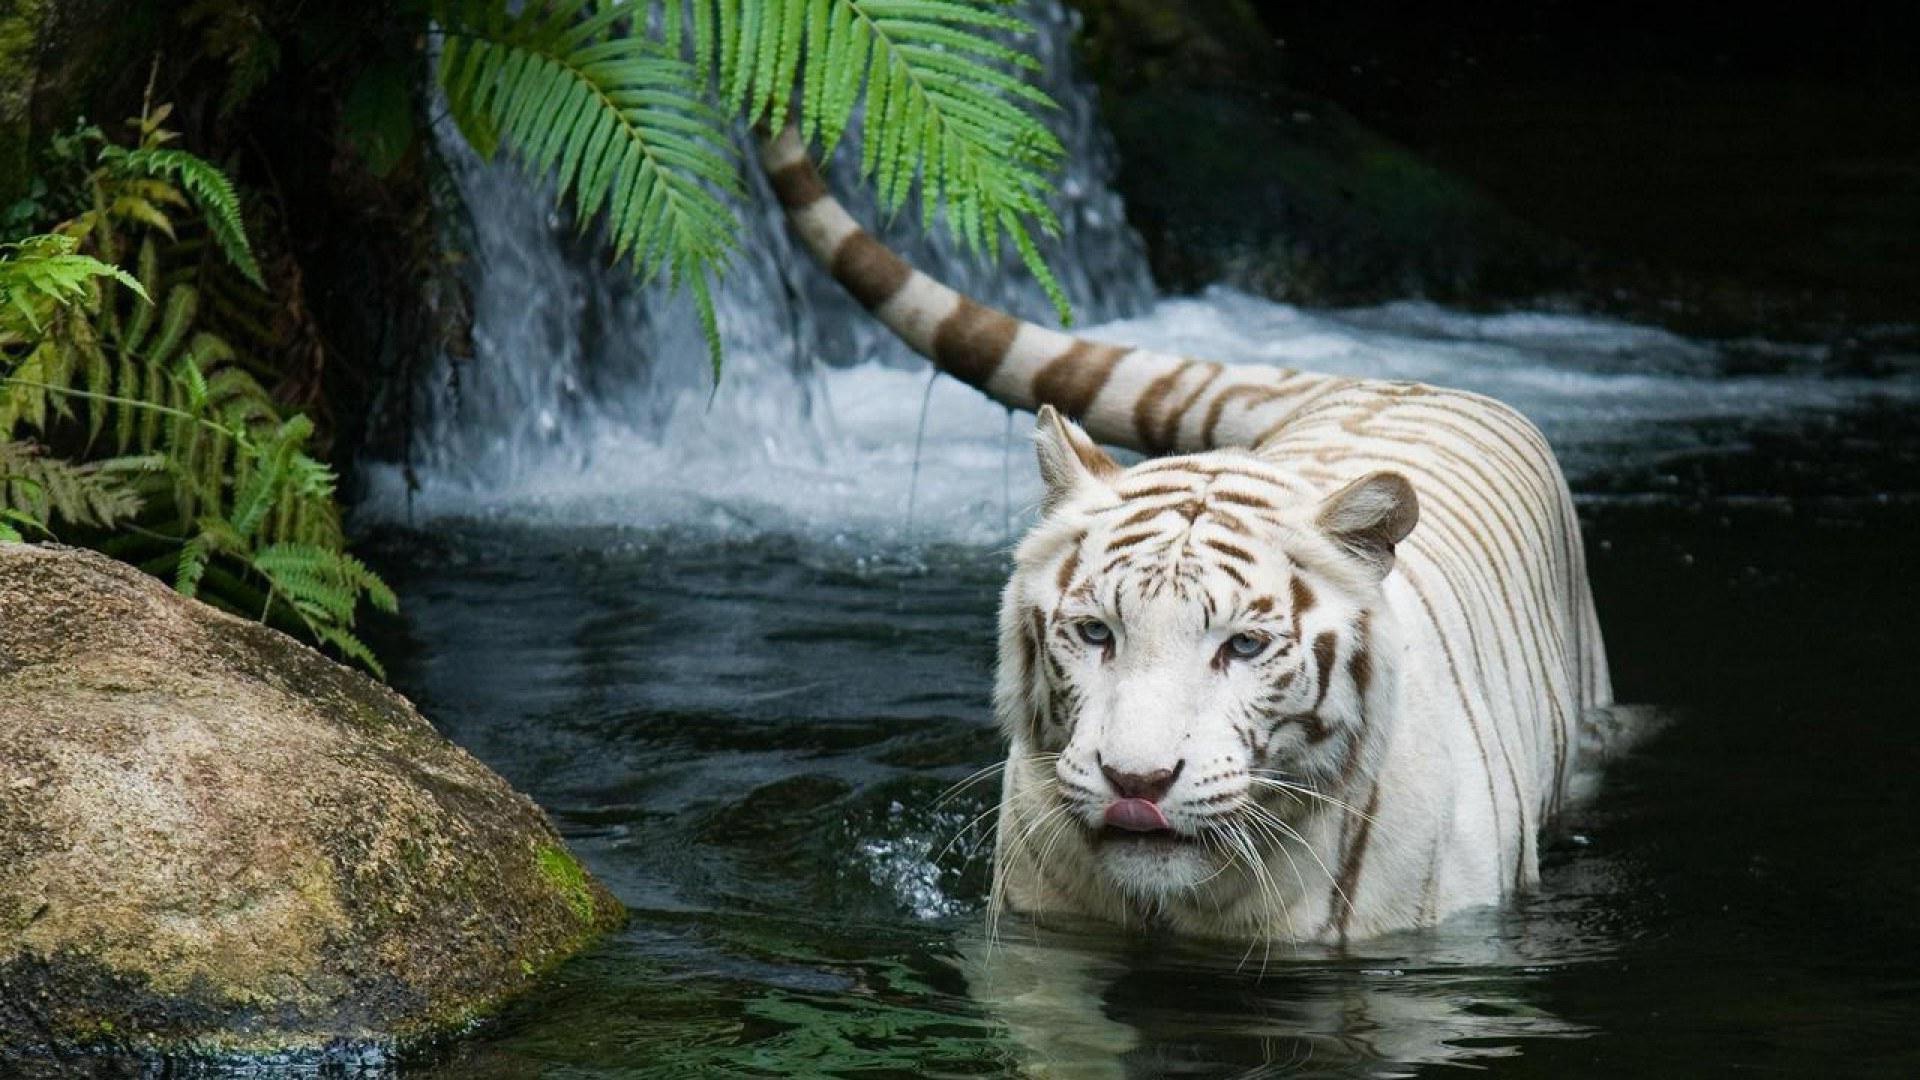 White Tiger Wallpaper High Quality Resolution